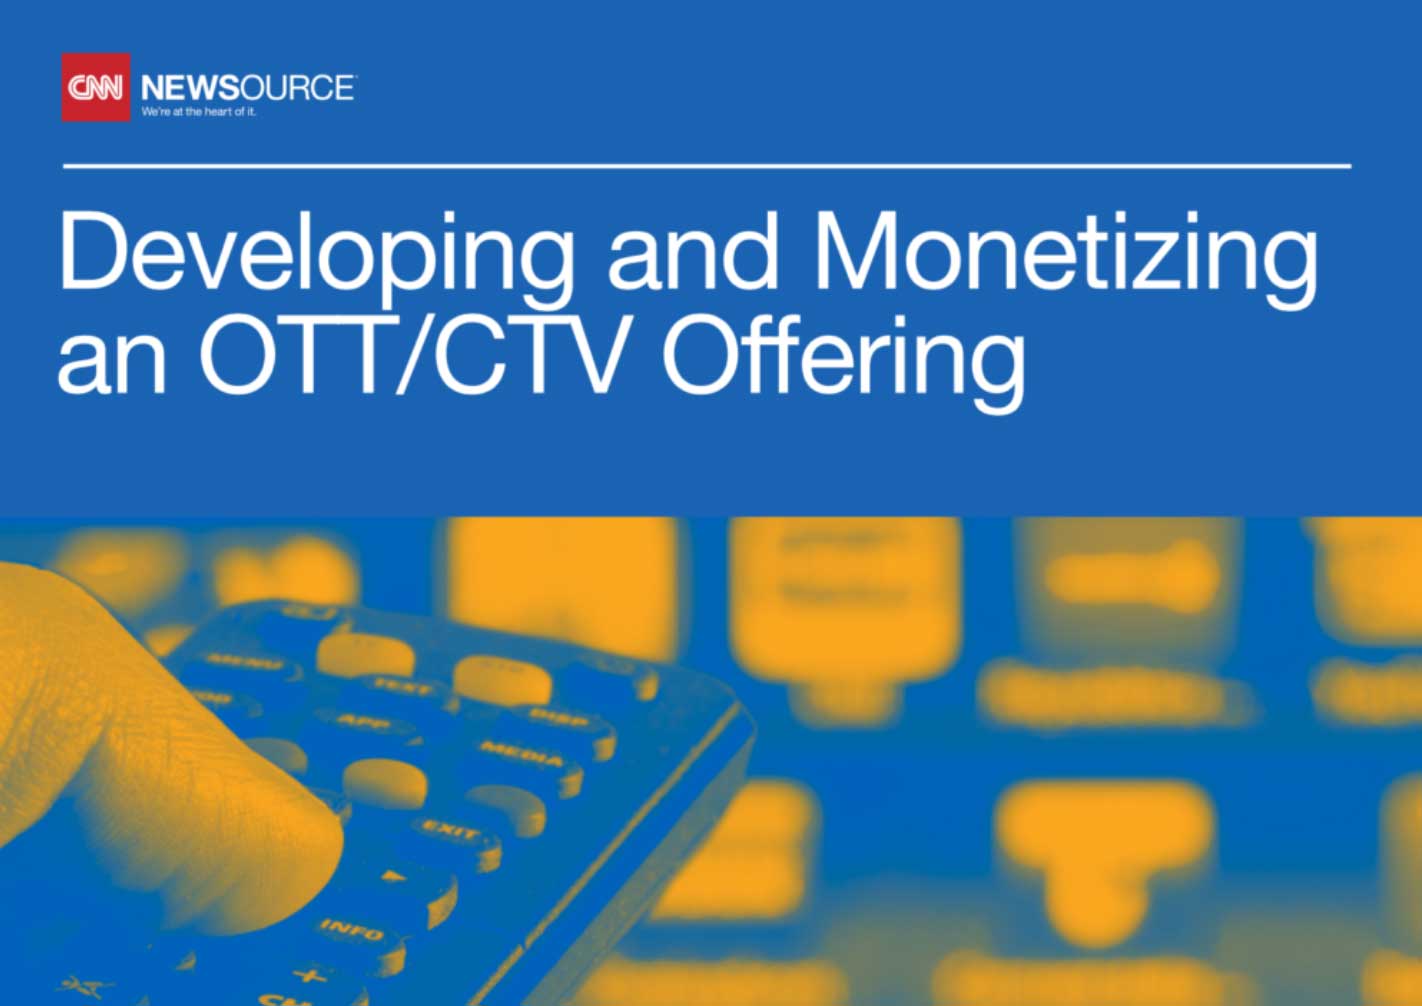 Developing-and-monteising-an-OTC-CTV-offering